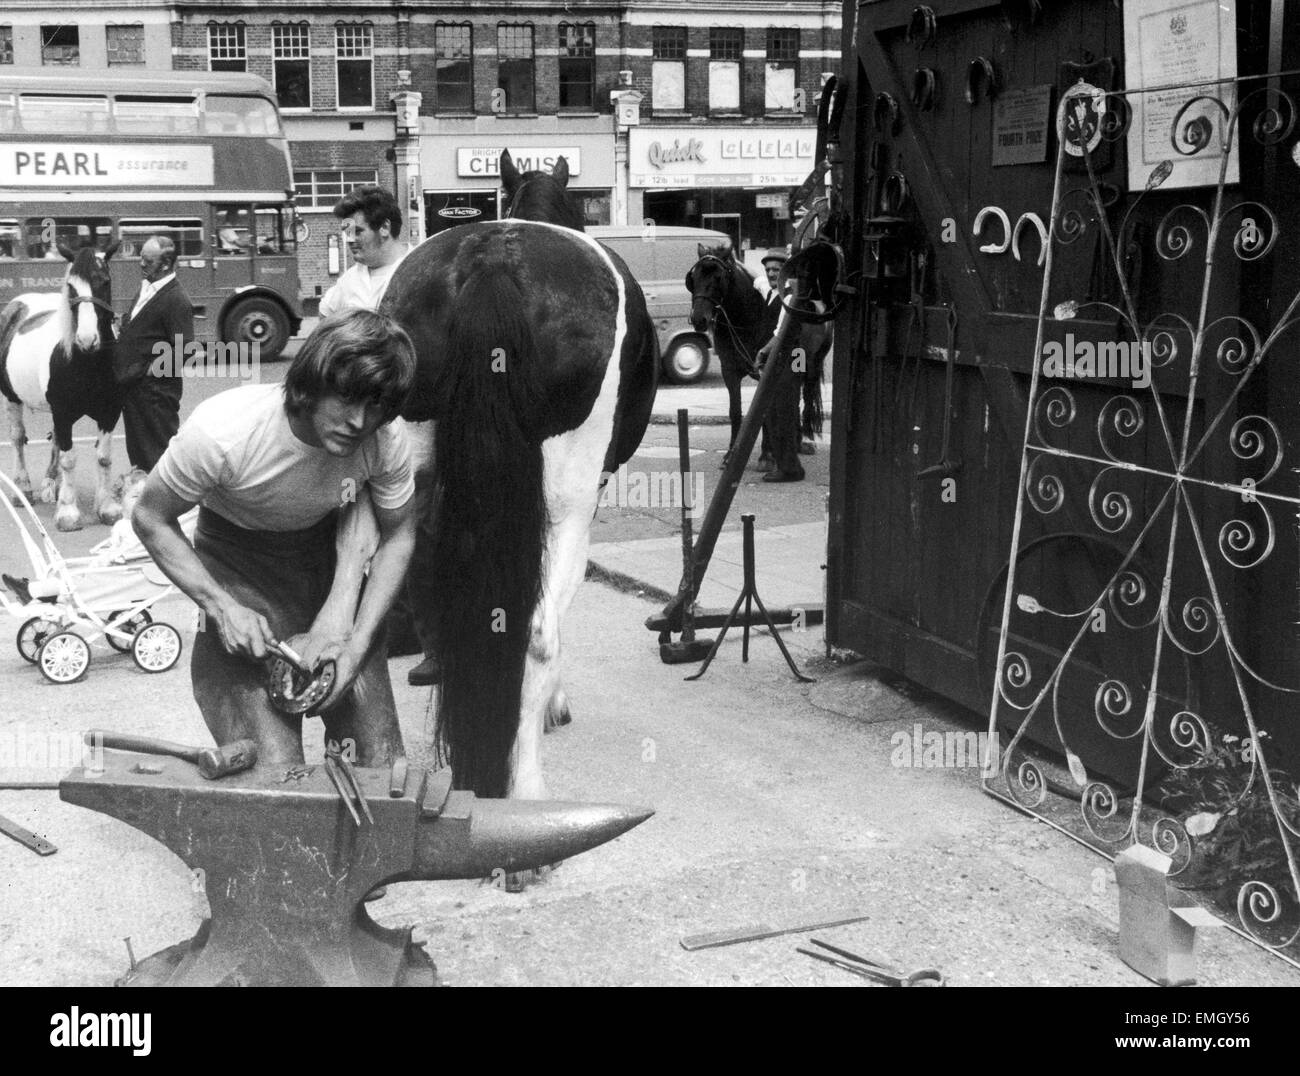 23 year old Londoner Derek Dewdney the village blacksmith of Brent, London, shoes the horses at his forge against a back cloth of a teeming street as tankers, trucks and buses thunder by. 30th July 1970 Stock Photo